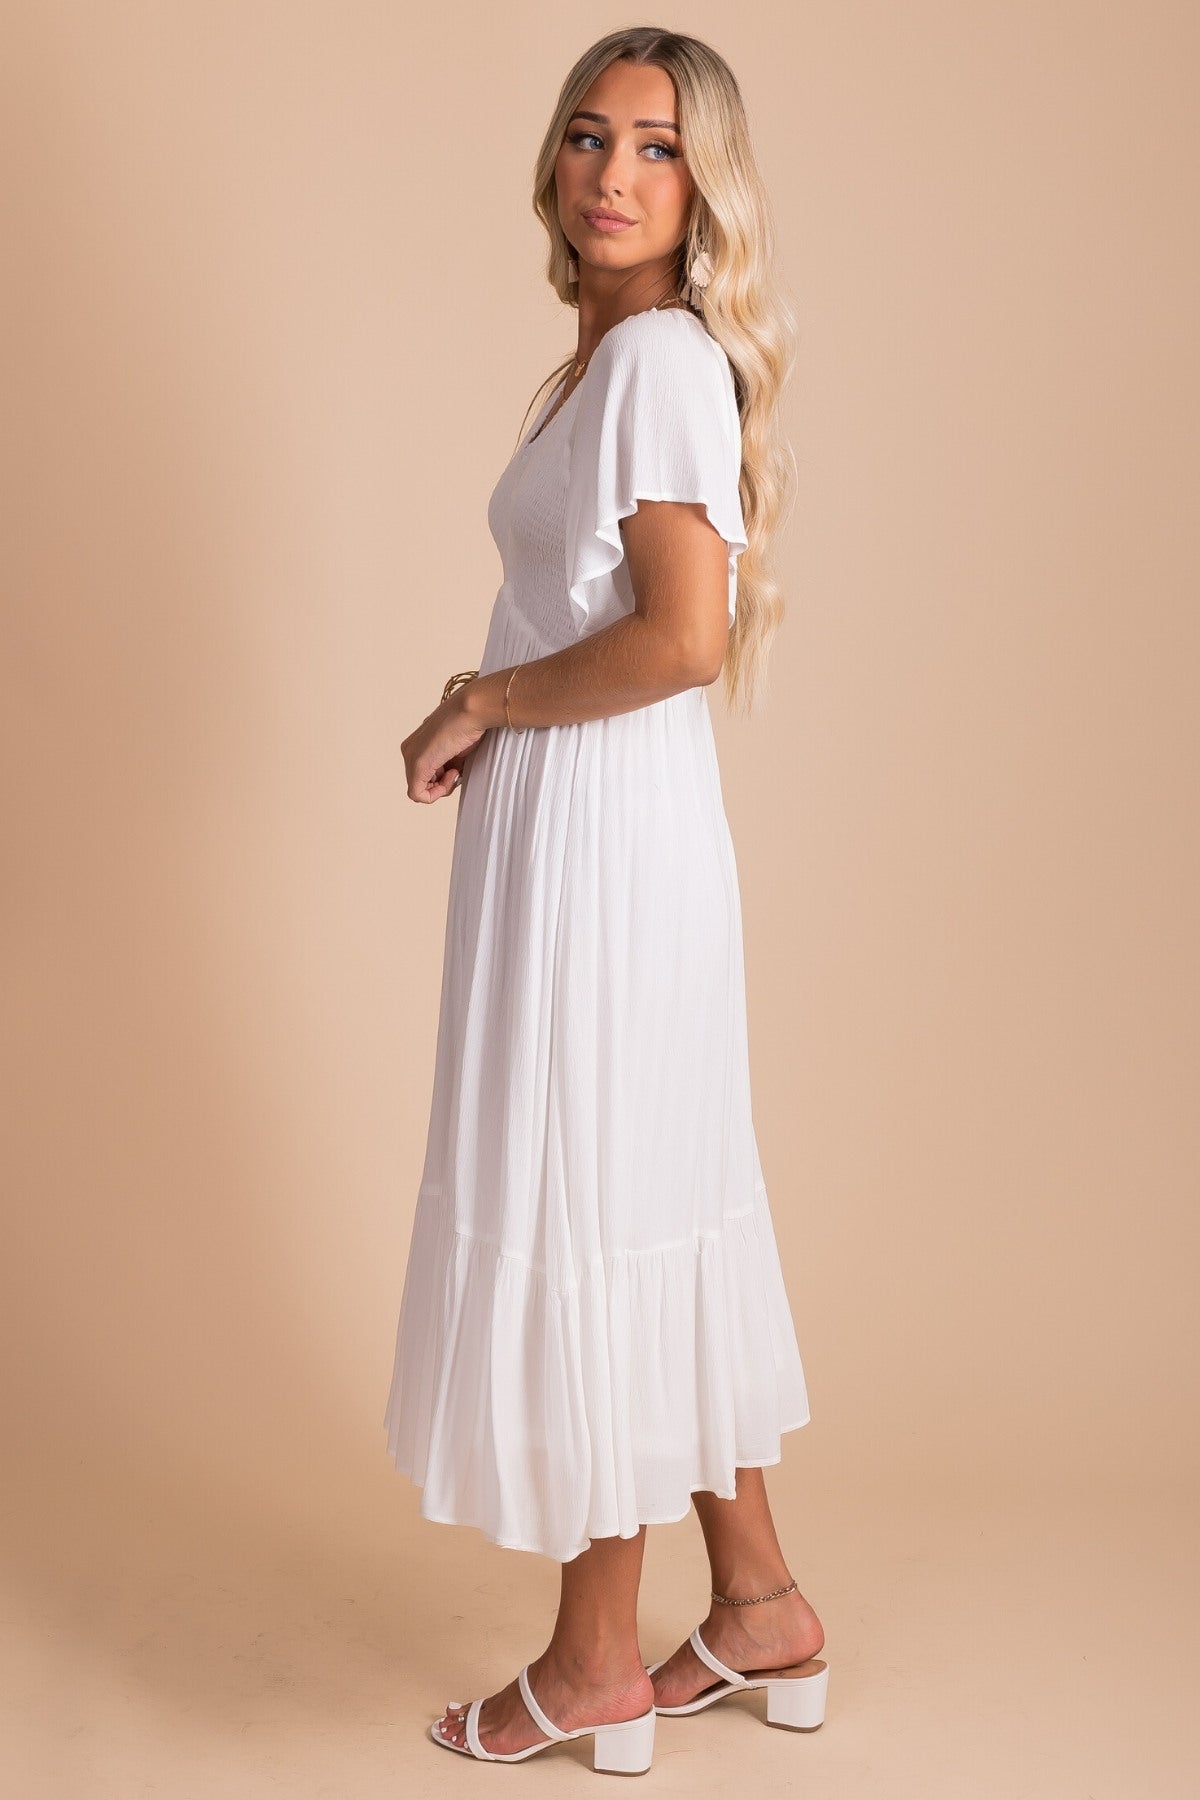 Boutique White Dress Bohemian Style with Flutter Sleeves and Empire Waist